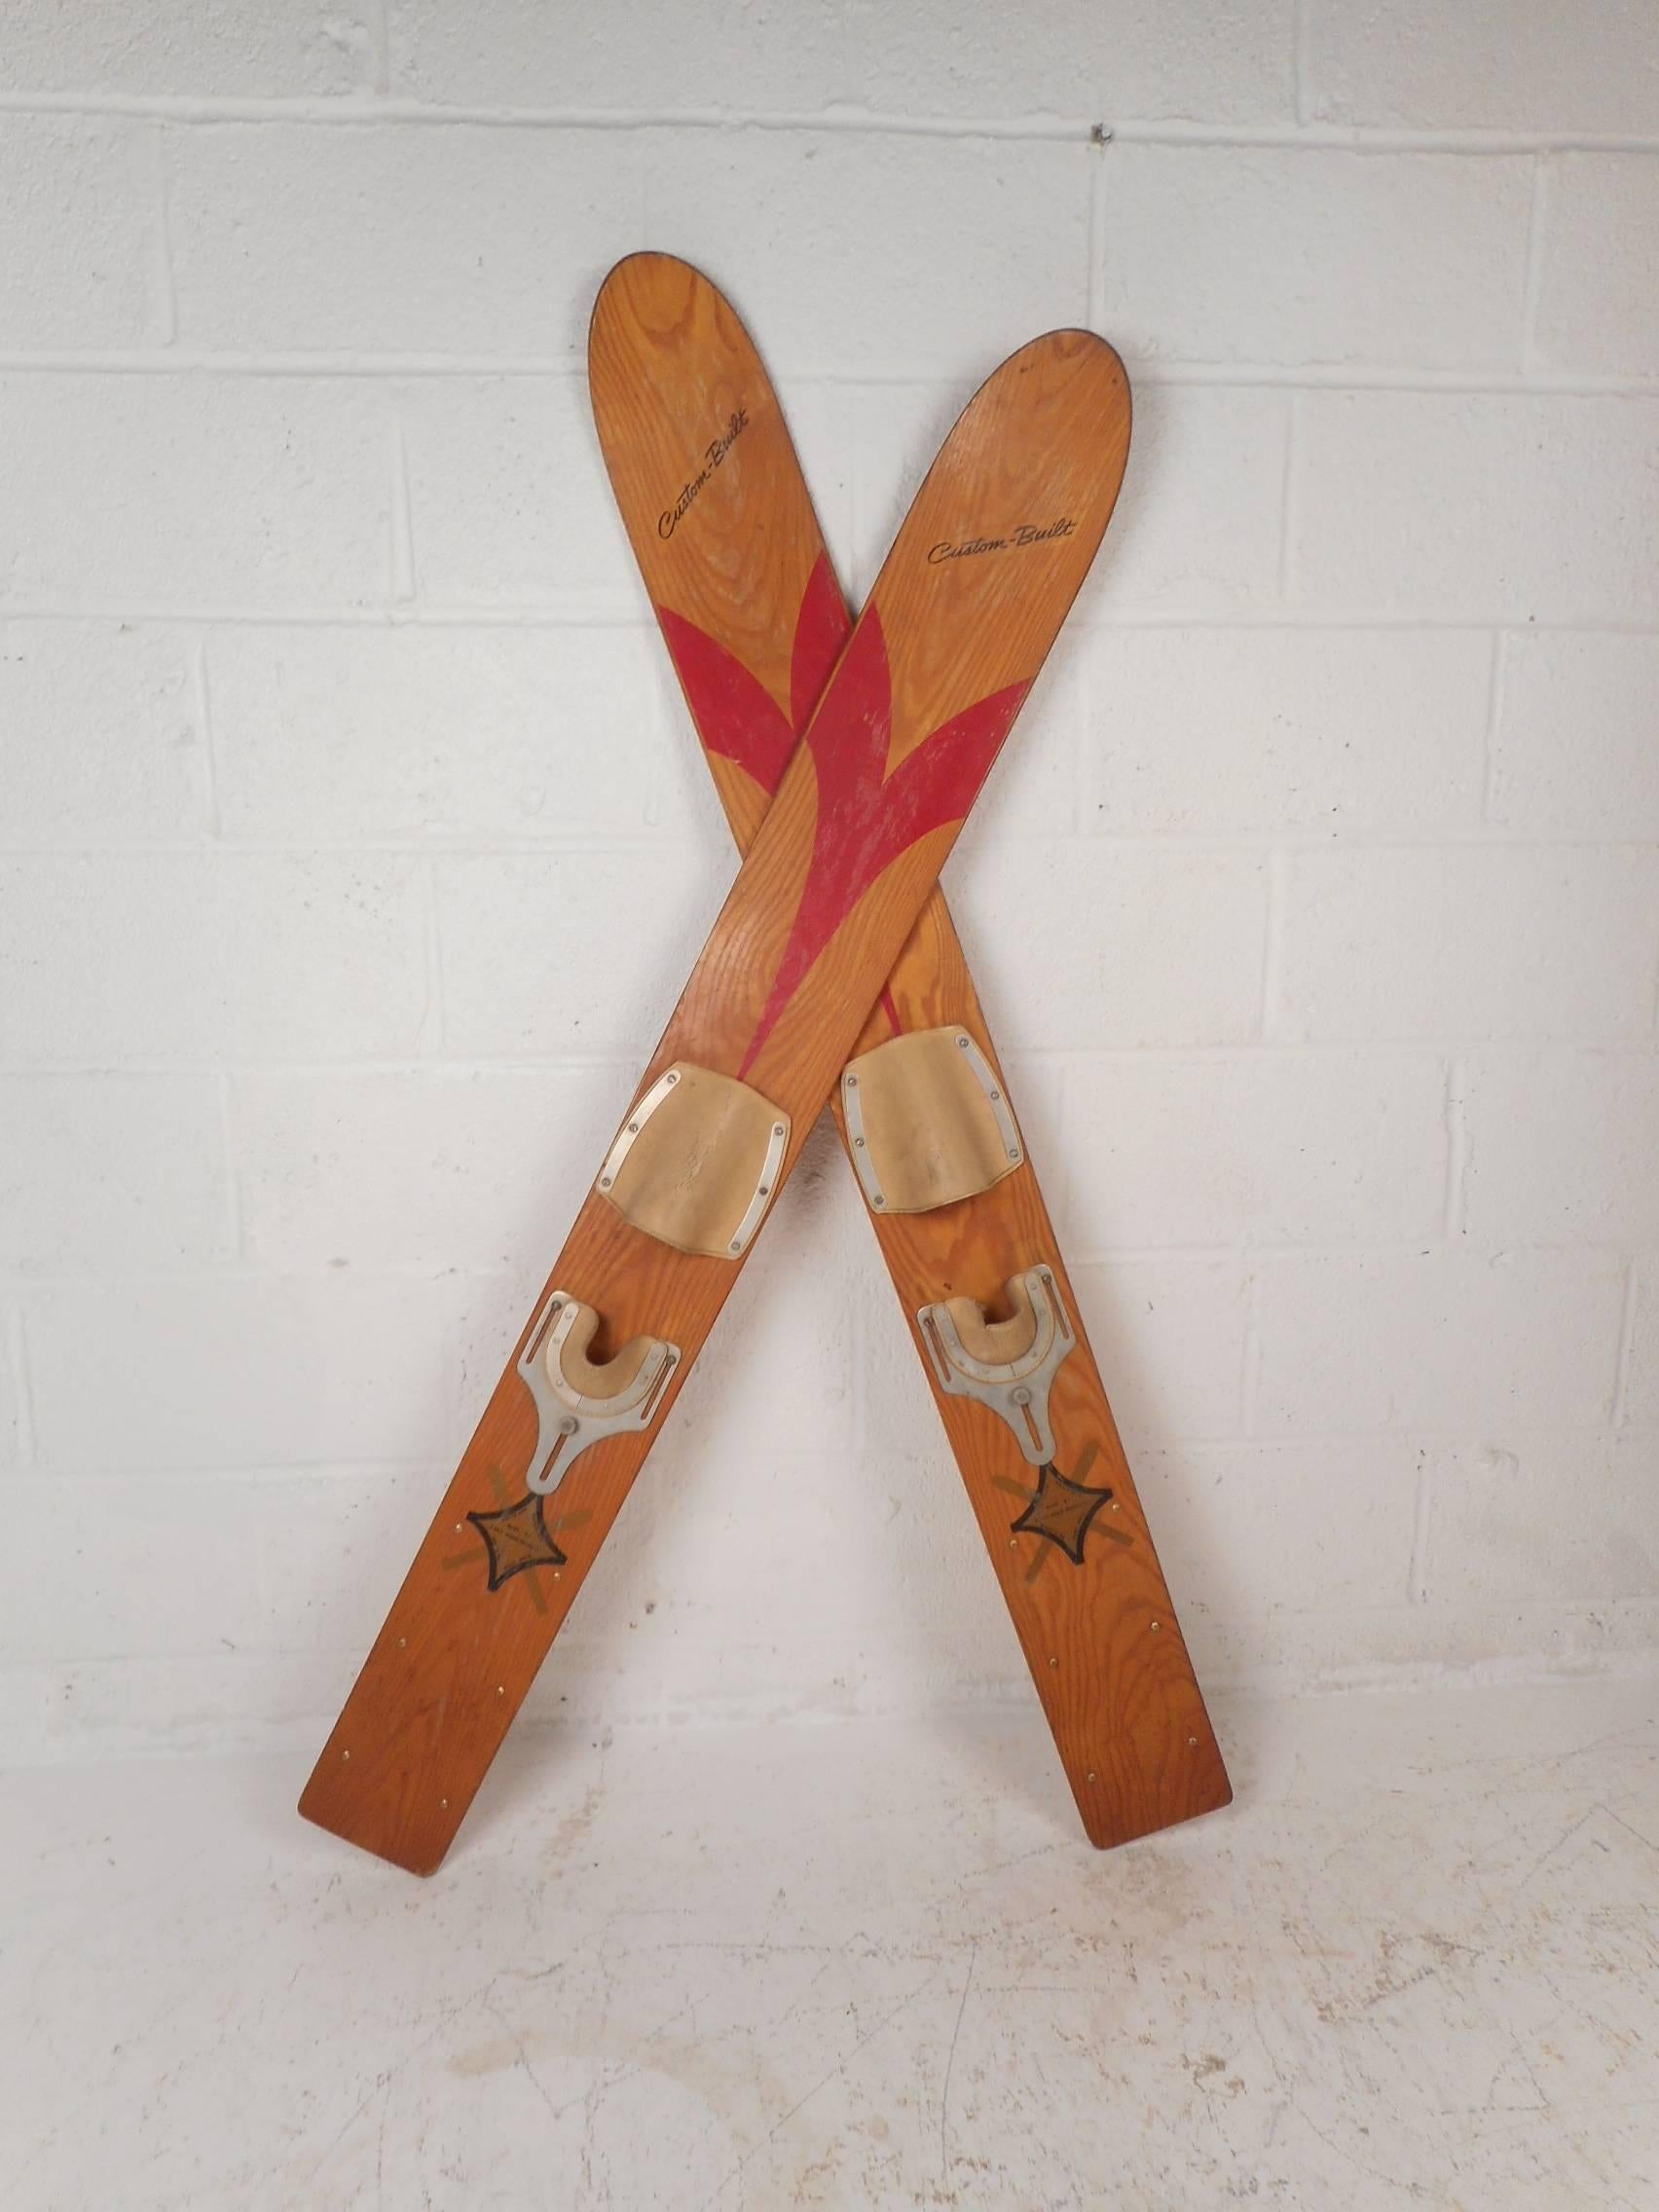 This excellent pair of vintage water skis are stamped, "White Ash Water Skis by Aqua Wood Products." This wonderful pair looks great as a decorative object on any wall. The custom build design and beautiful blonde sculpted wood adds to the